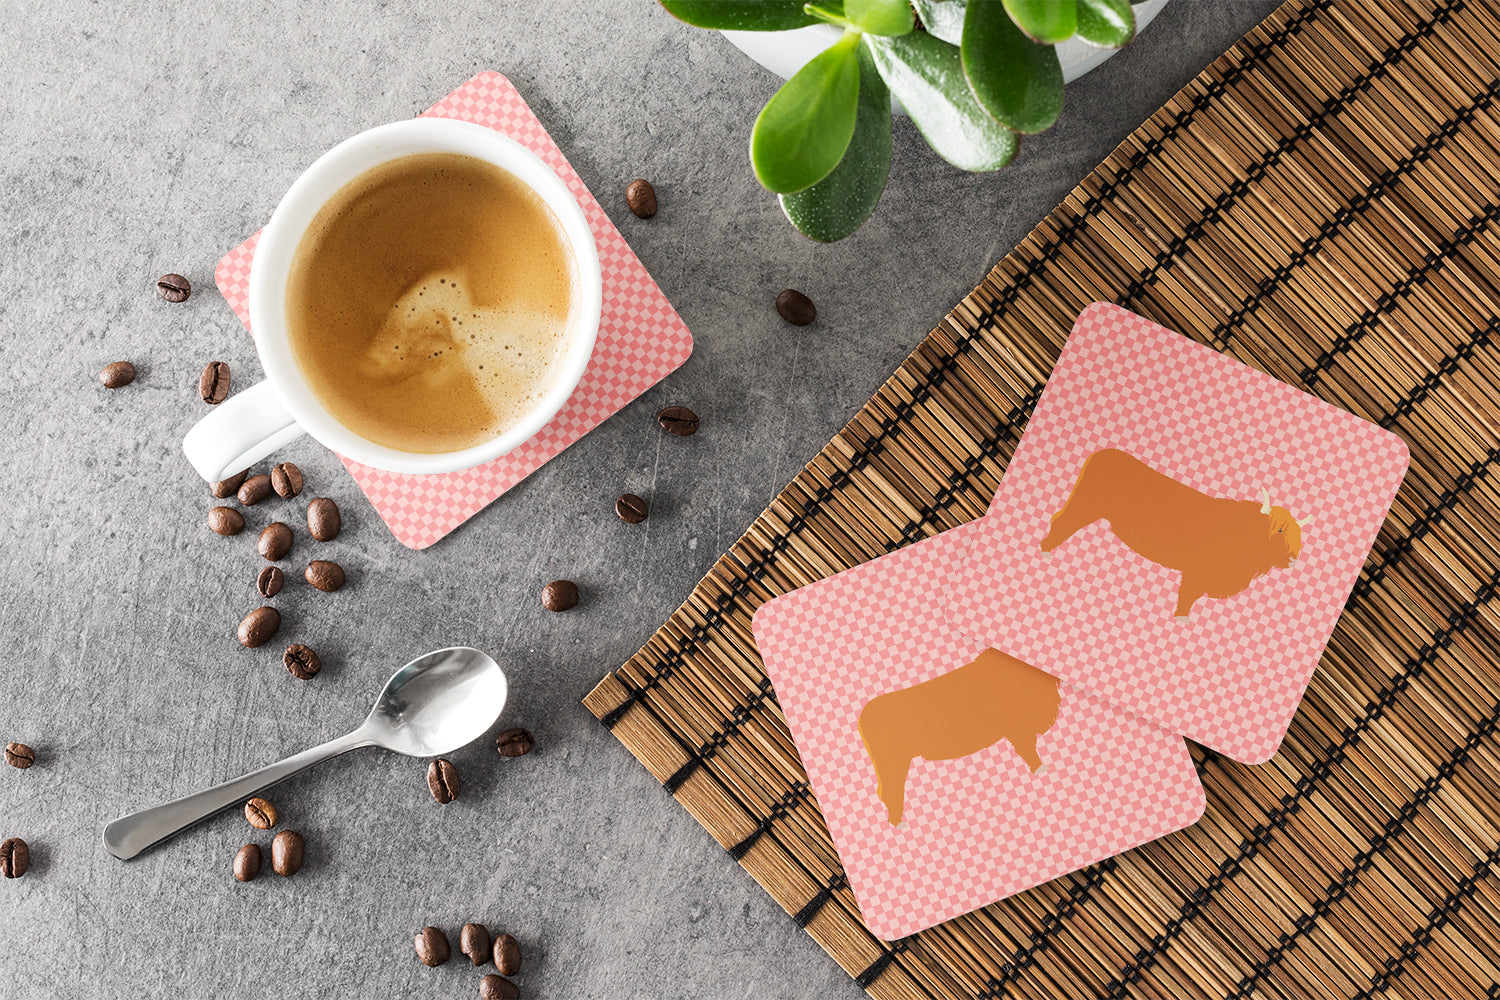 Highland Cow Pink Check Foam Coaster Set of 4 BB7820FC - the-store.com